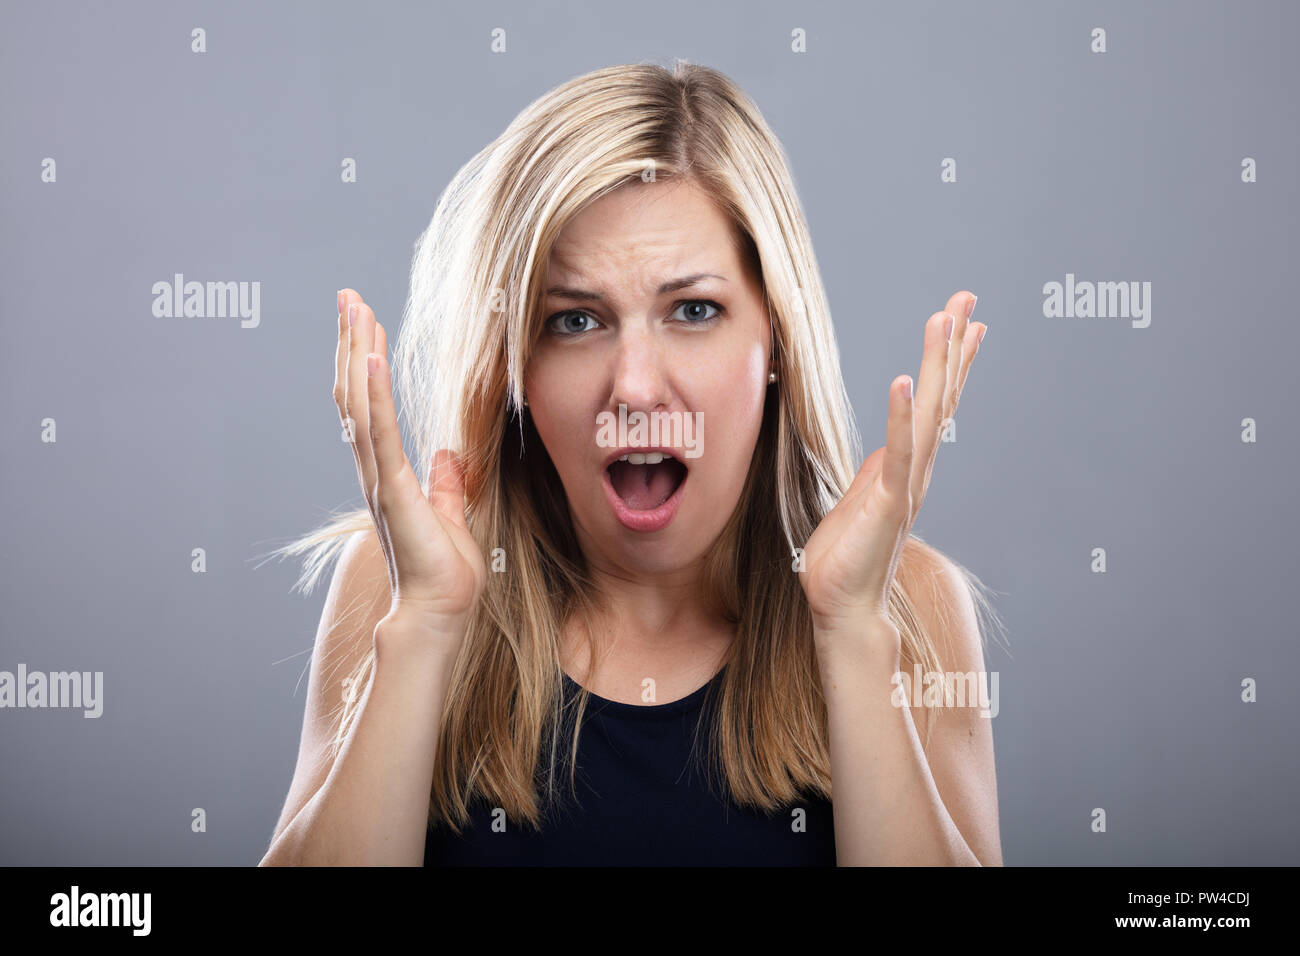 Photo Of Shouting Young Woman On Grey Background Stock Photo